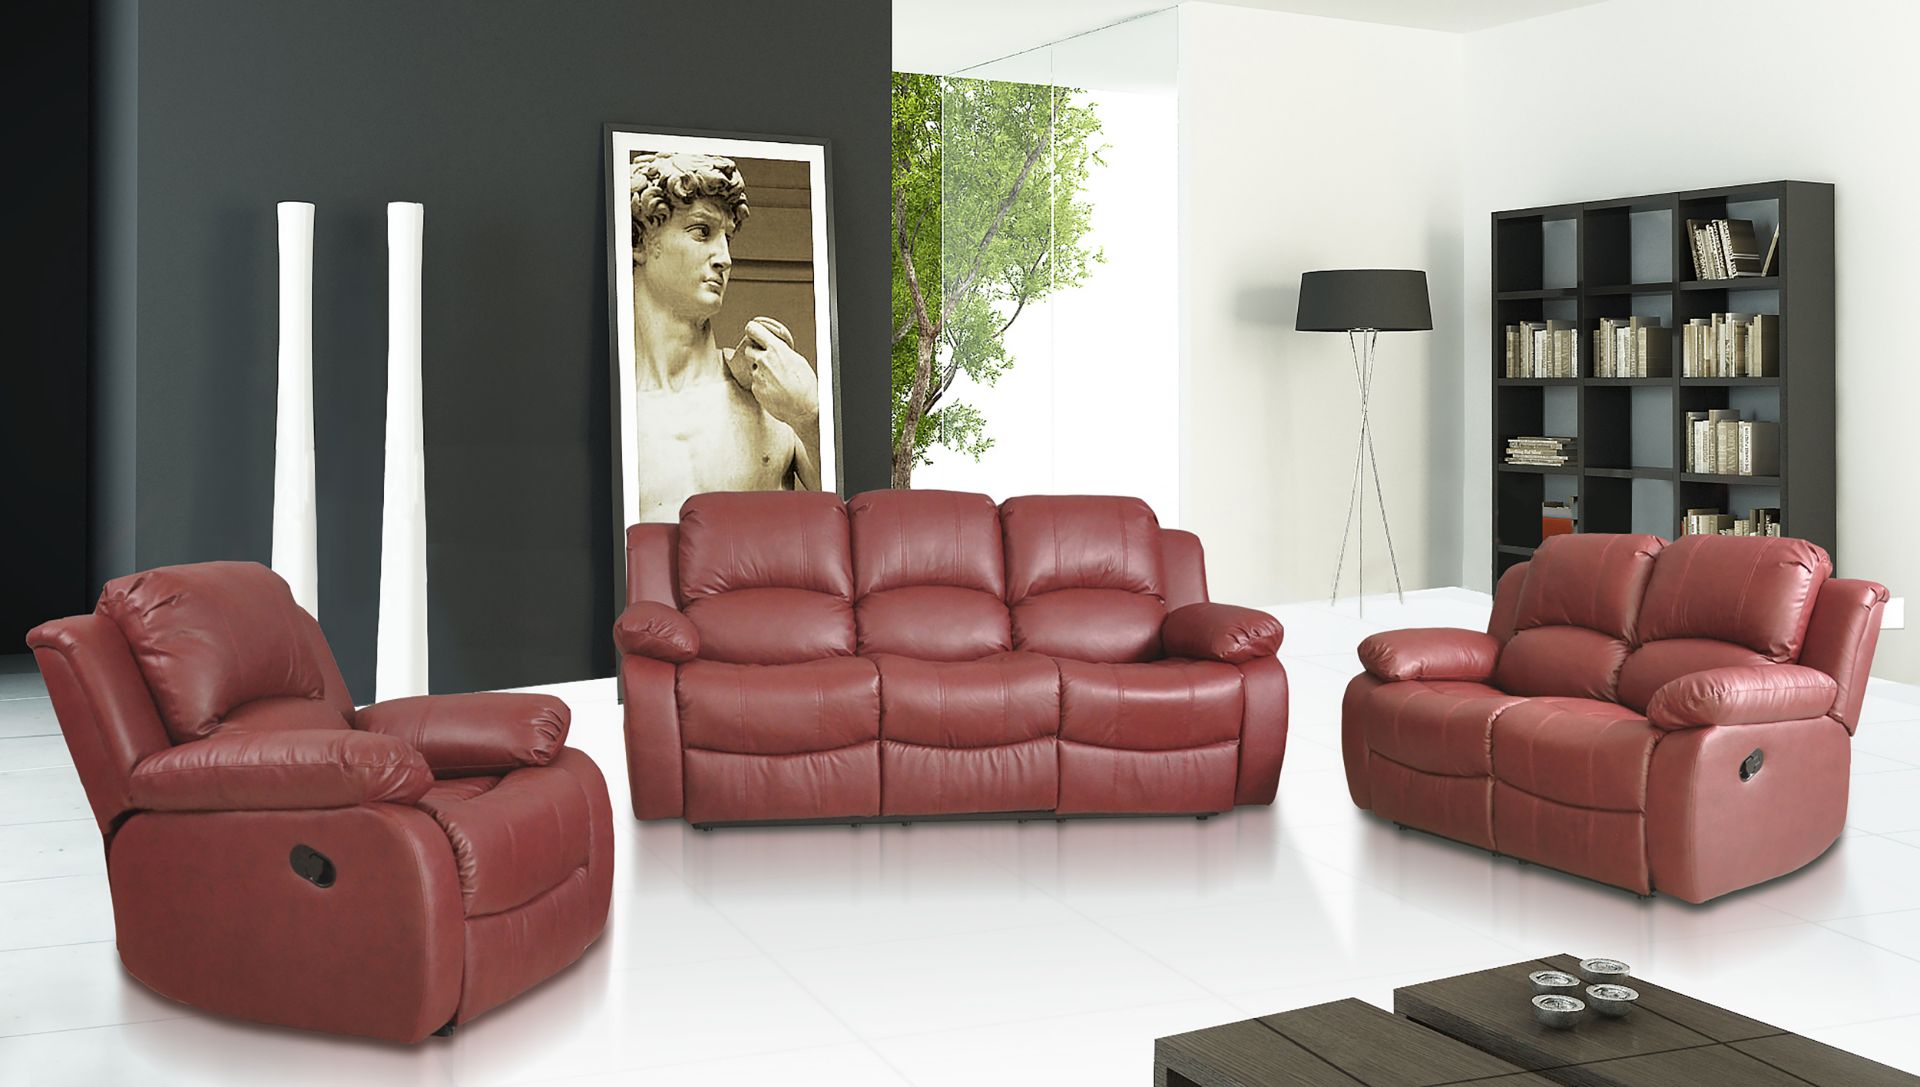 2 SEATER AND 2 SEATER BURGANDY LEATHER SUPREME VALANCE RECLINING SUITE